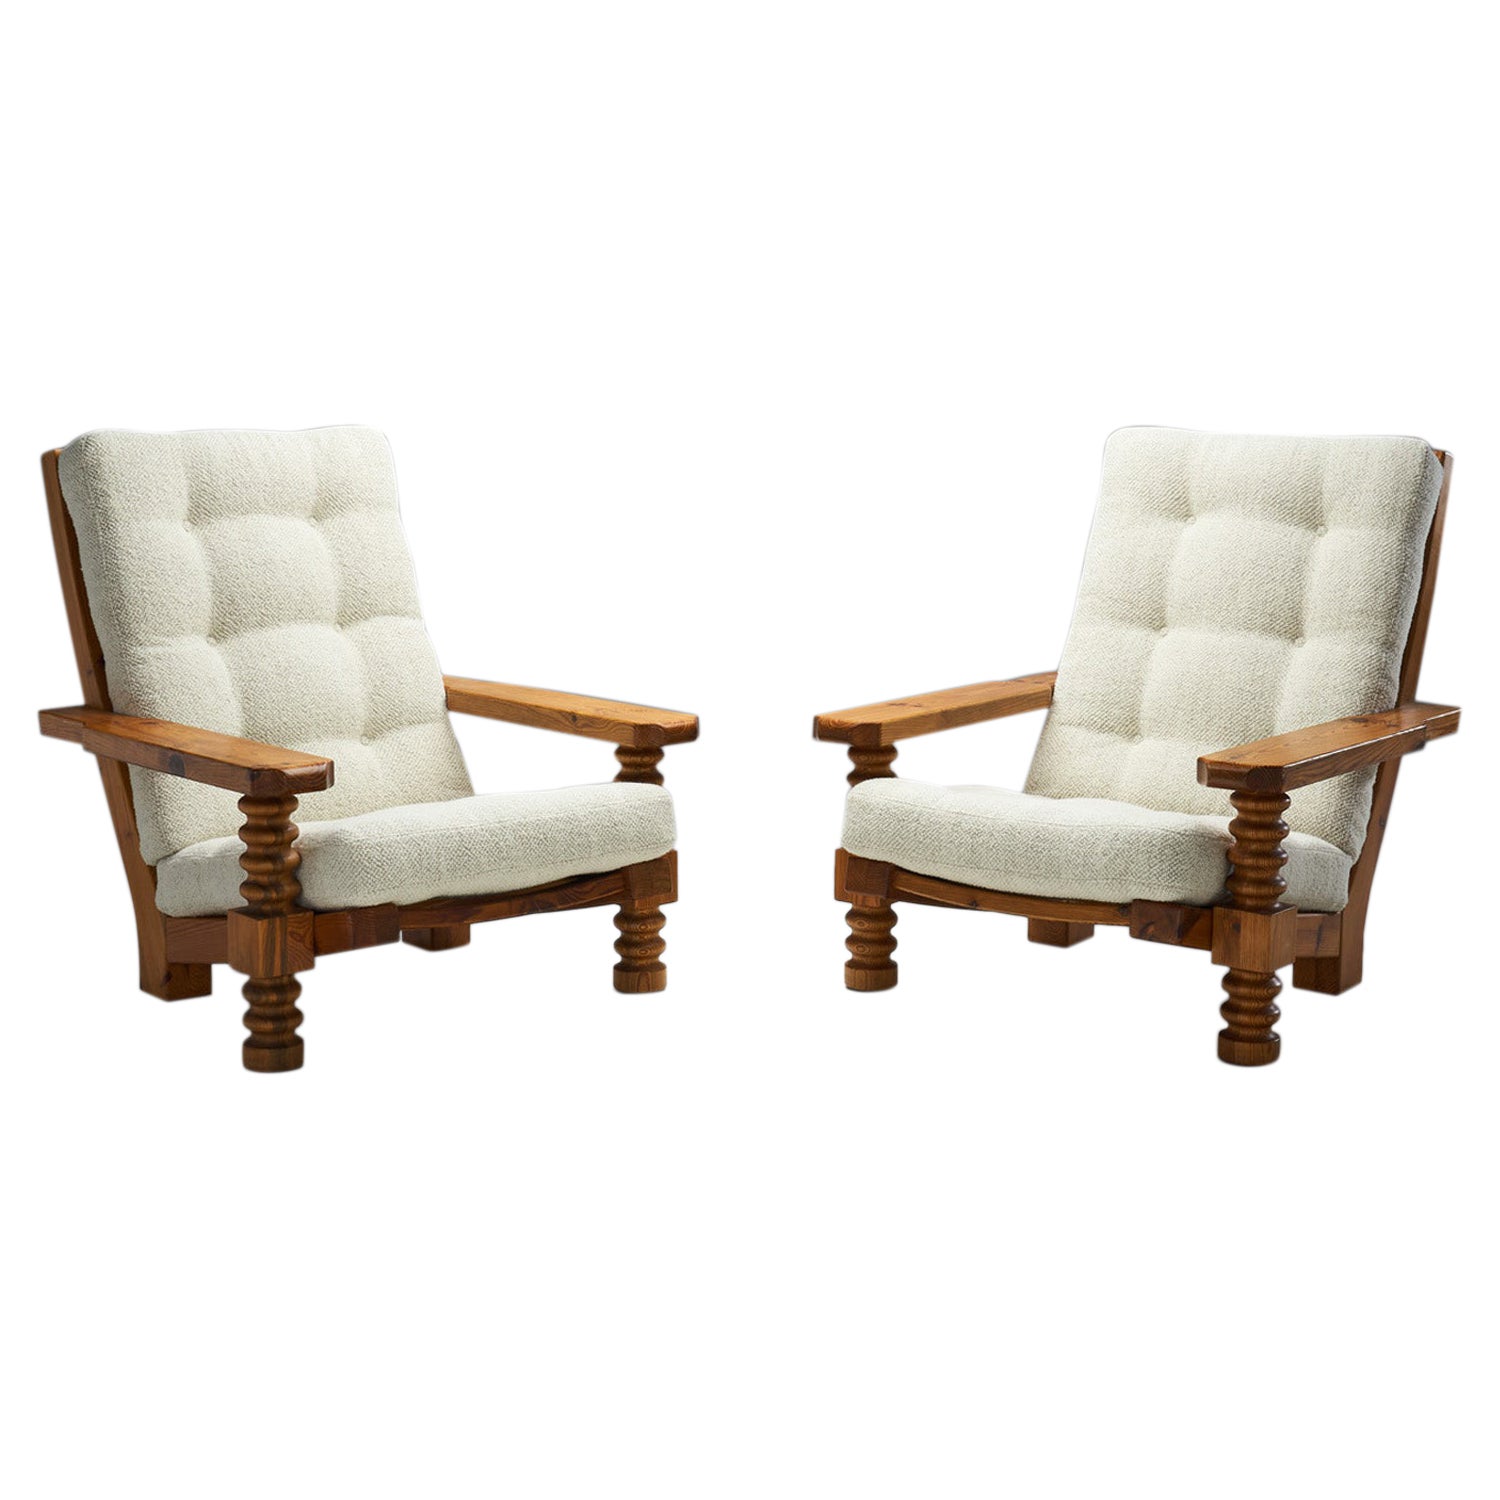 Swedish Pine Armchairs with Sculpted Legs, Sweden, 1960s For Sale